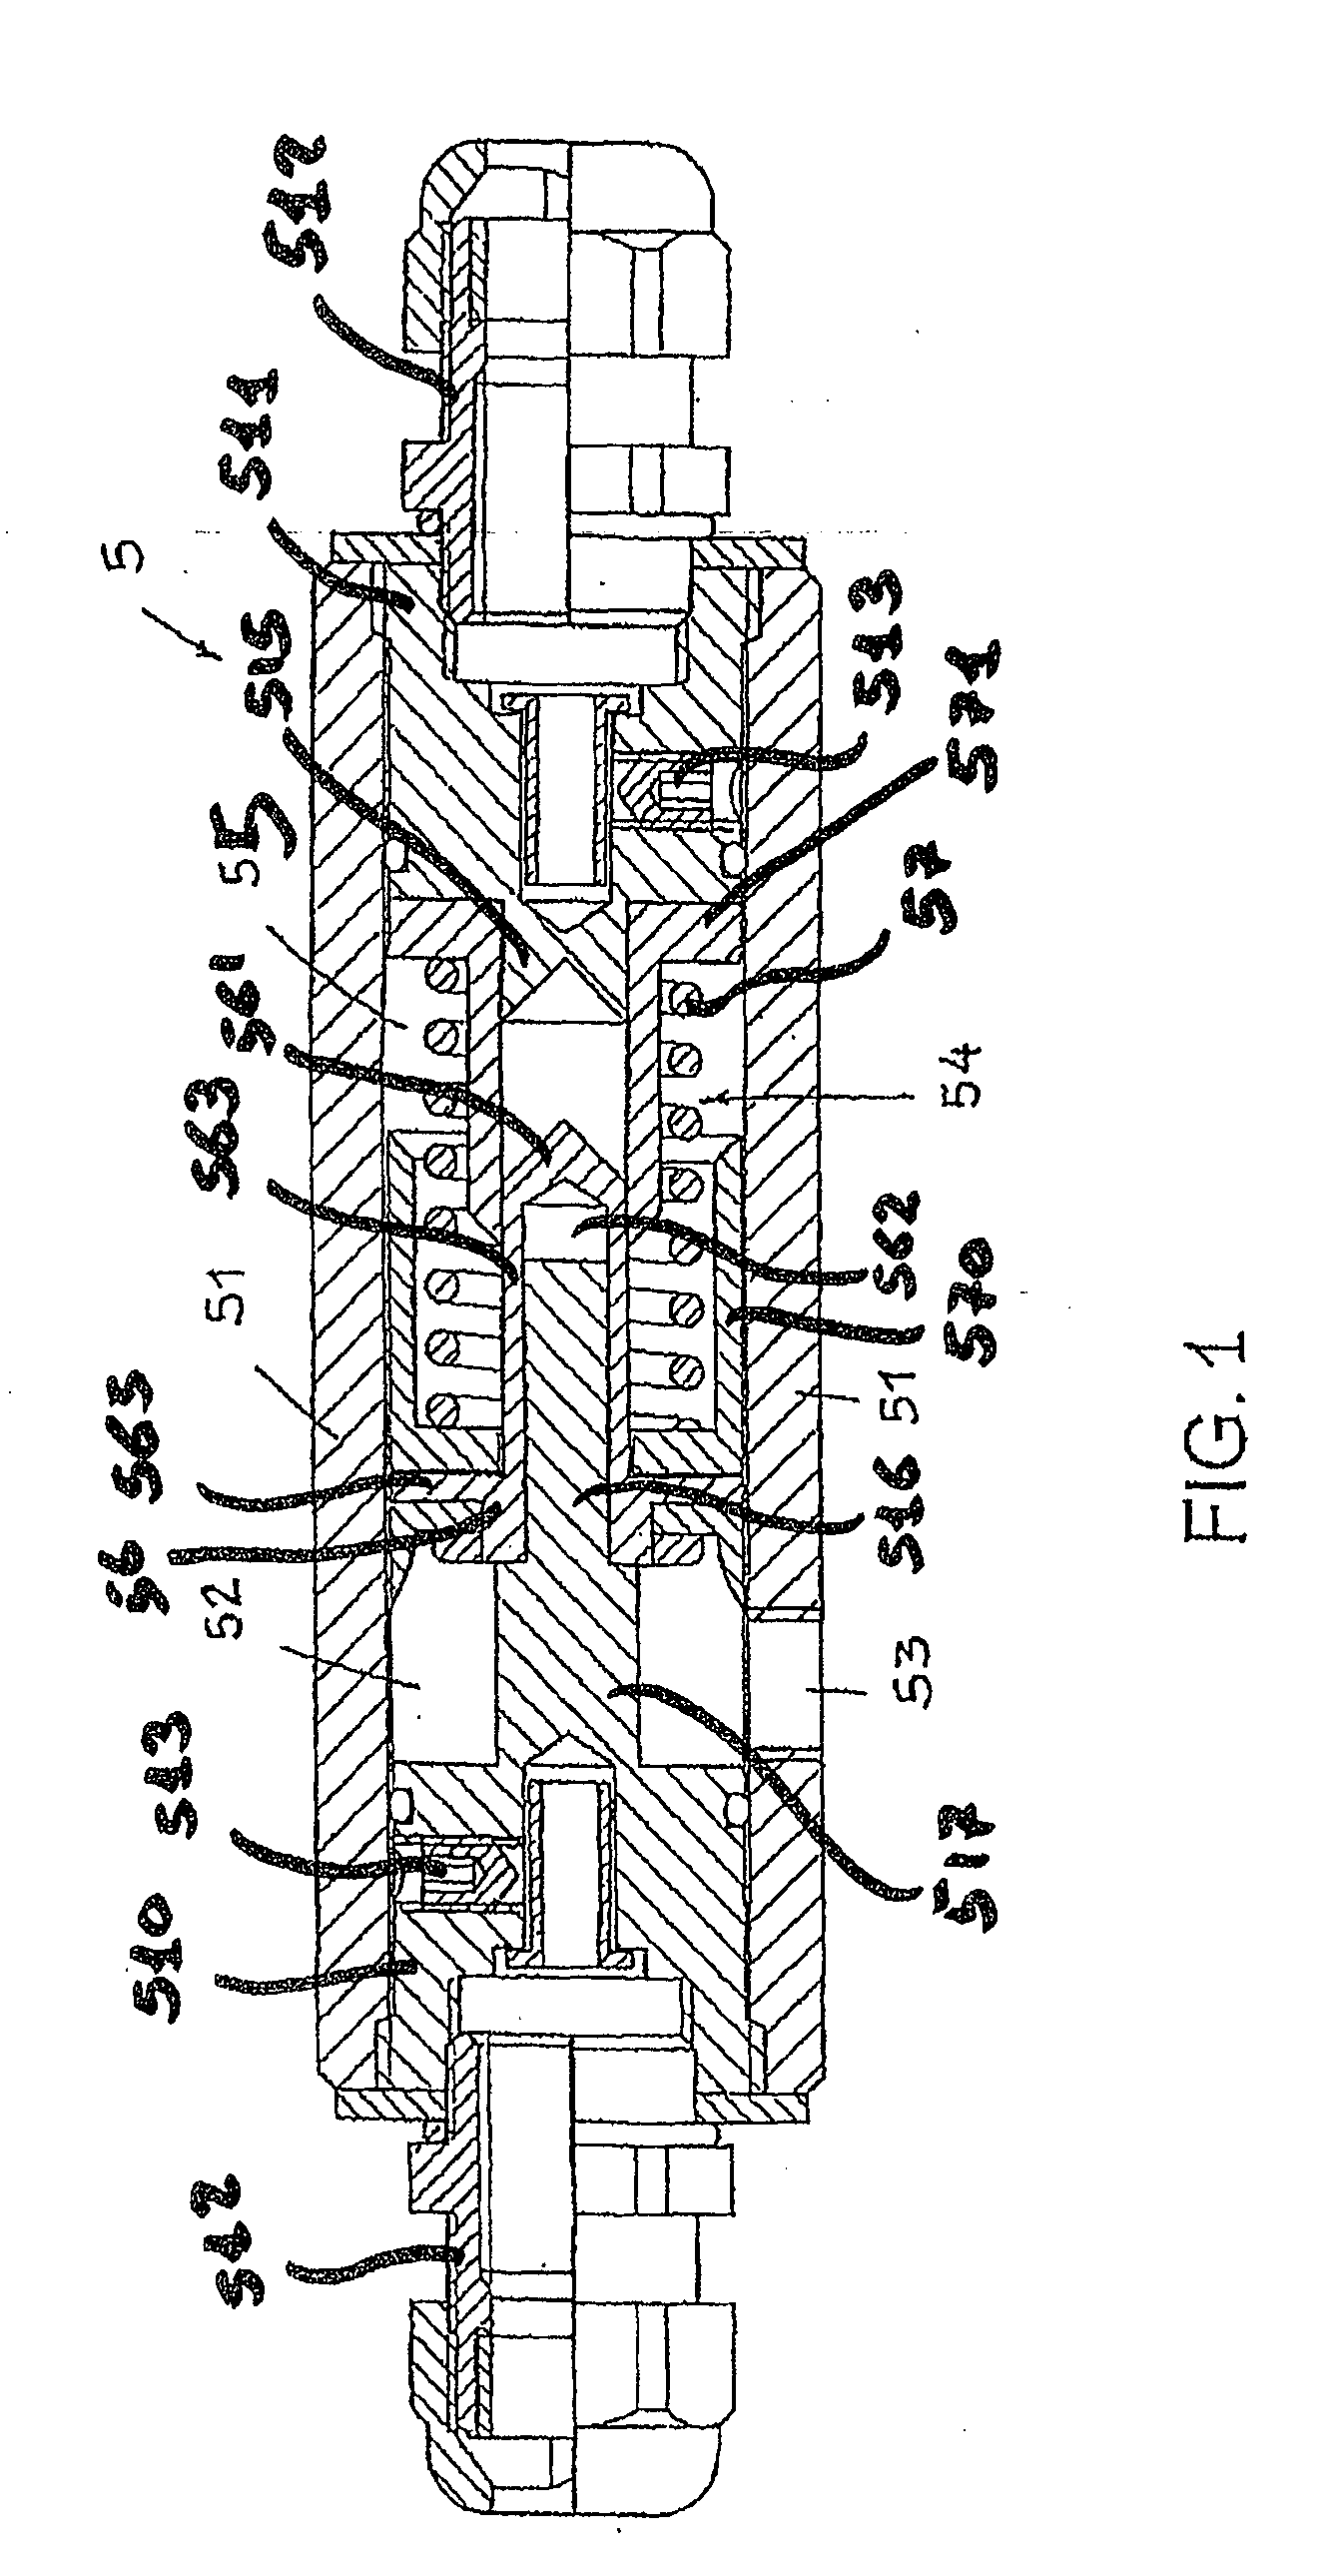 Apparatus for sectioning an electric energy flow in one or more conductors, and an electric energy generating plant comprising said apparatus